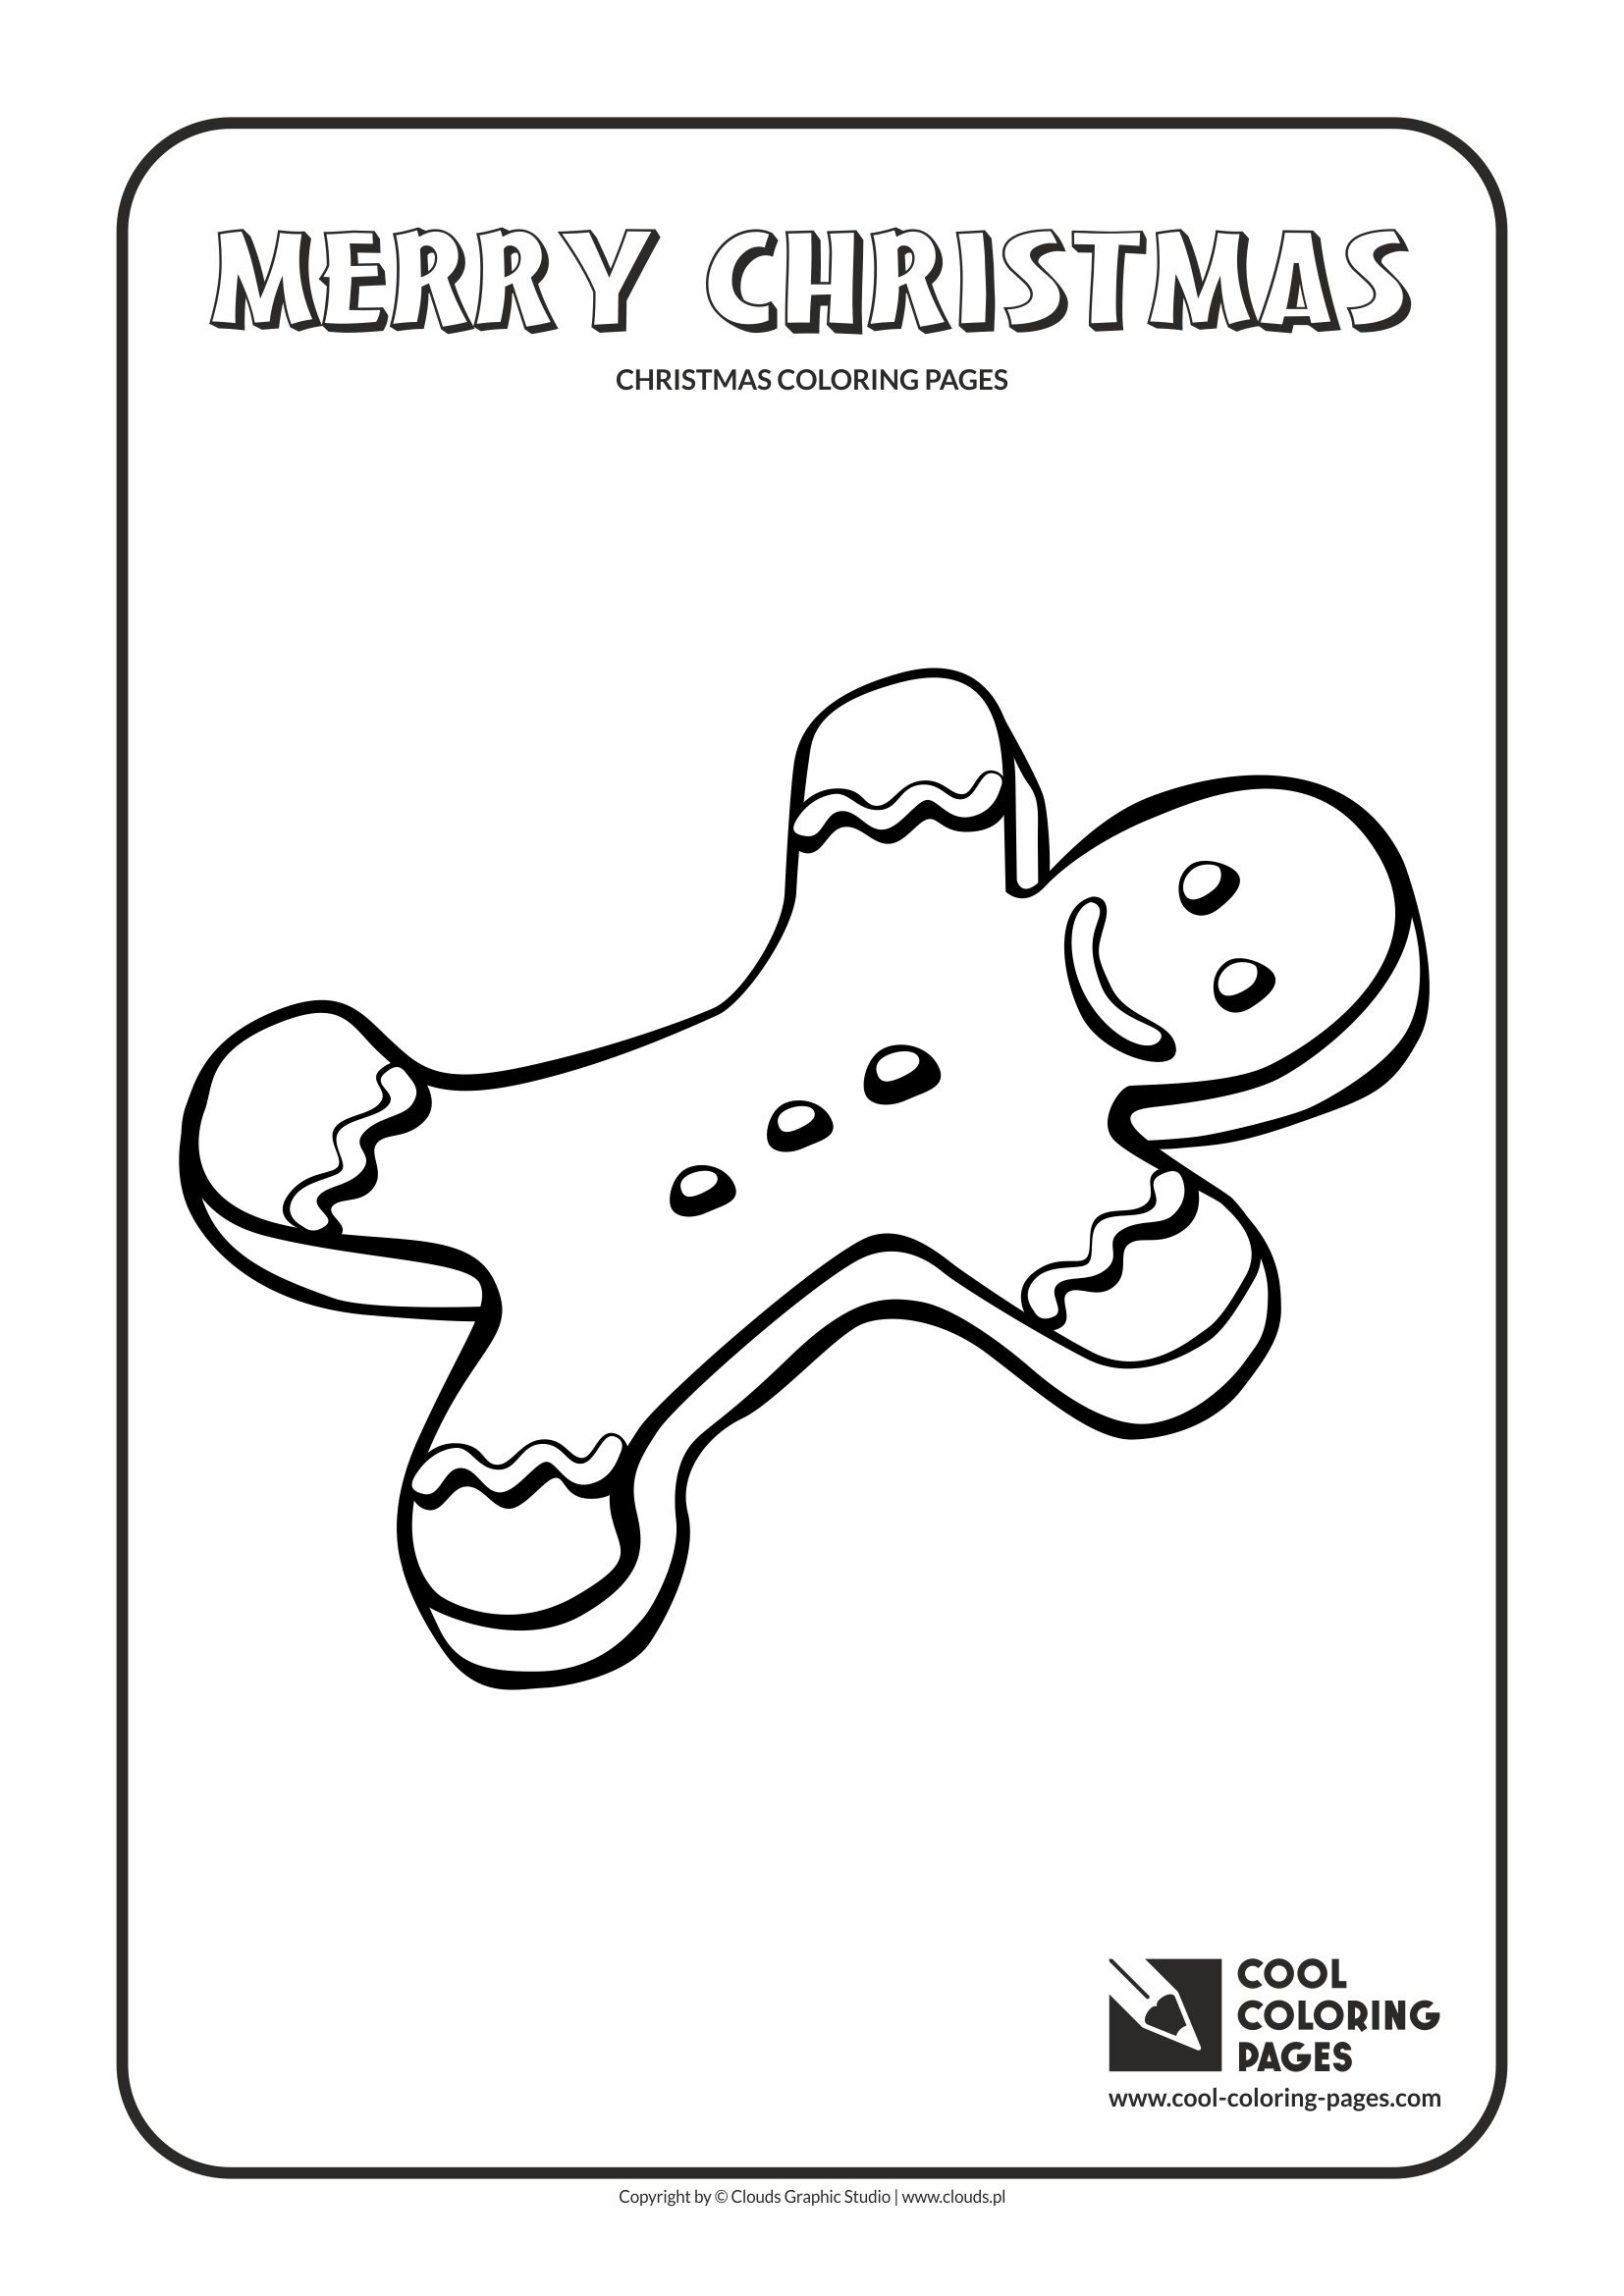 Cool coloring pages gingerbread man coloring page